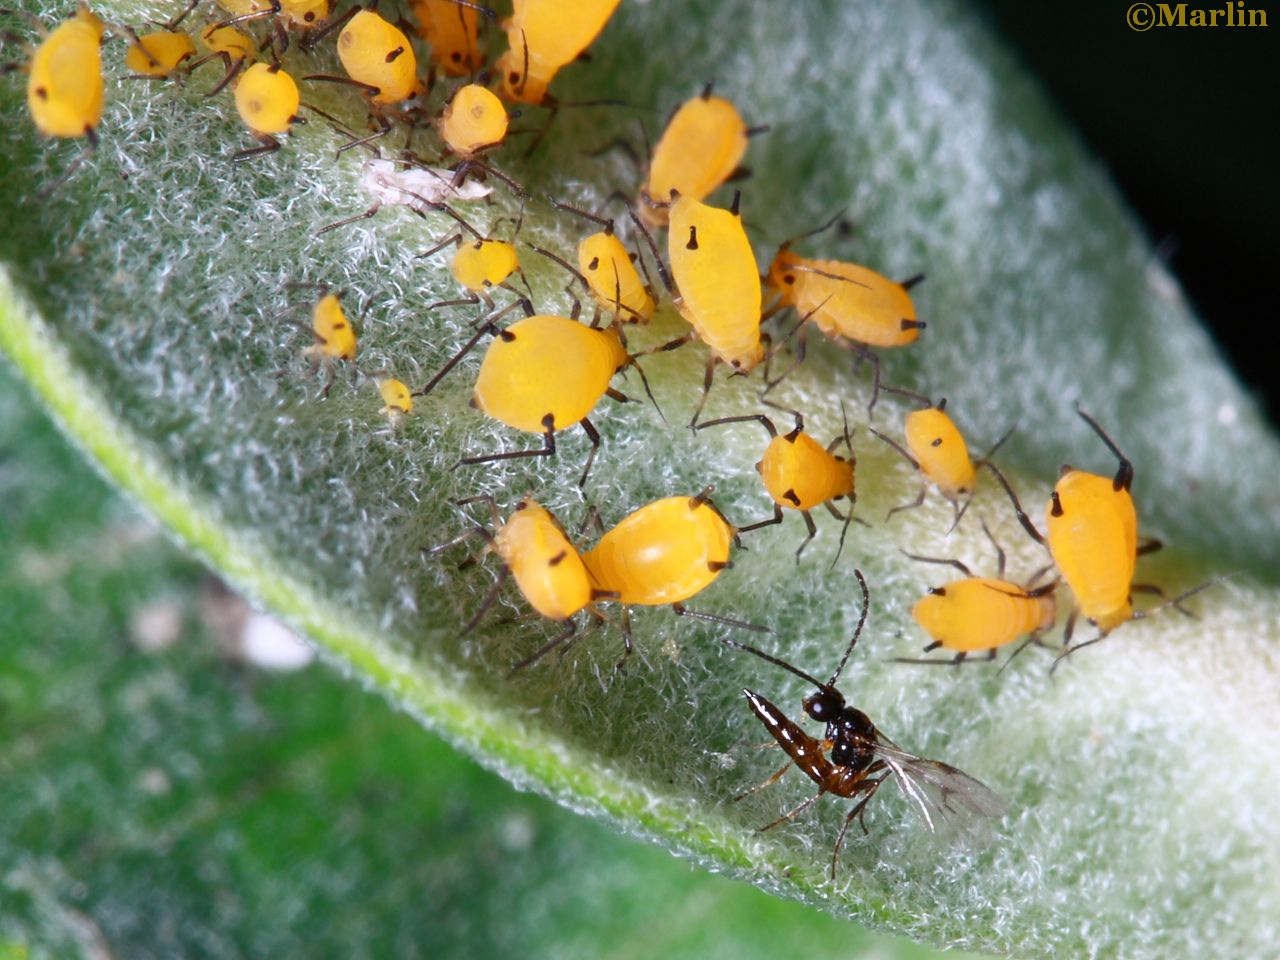 3mm wasp lays eggs in aphid colony